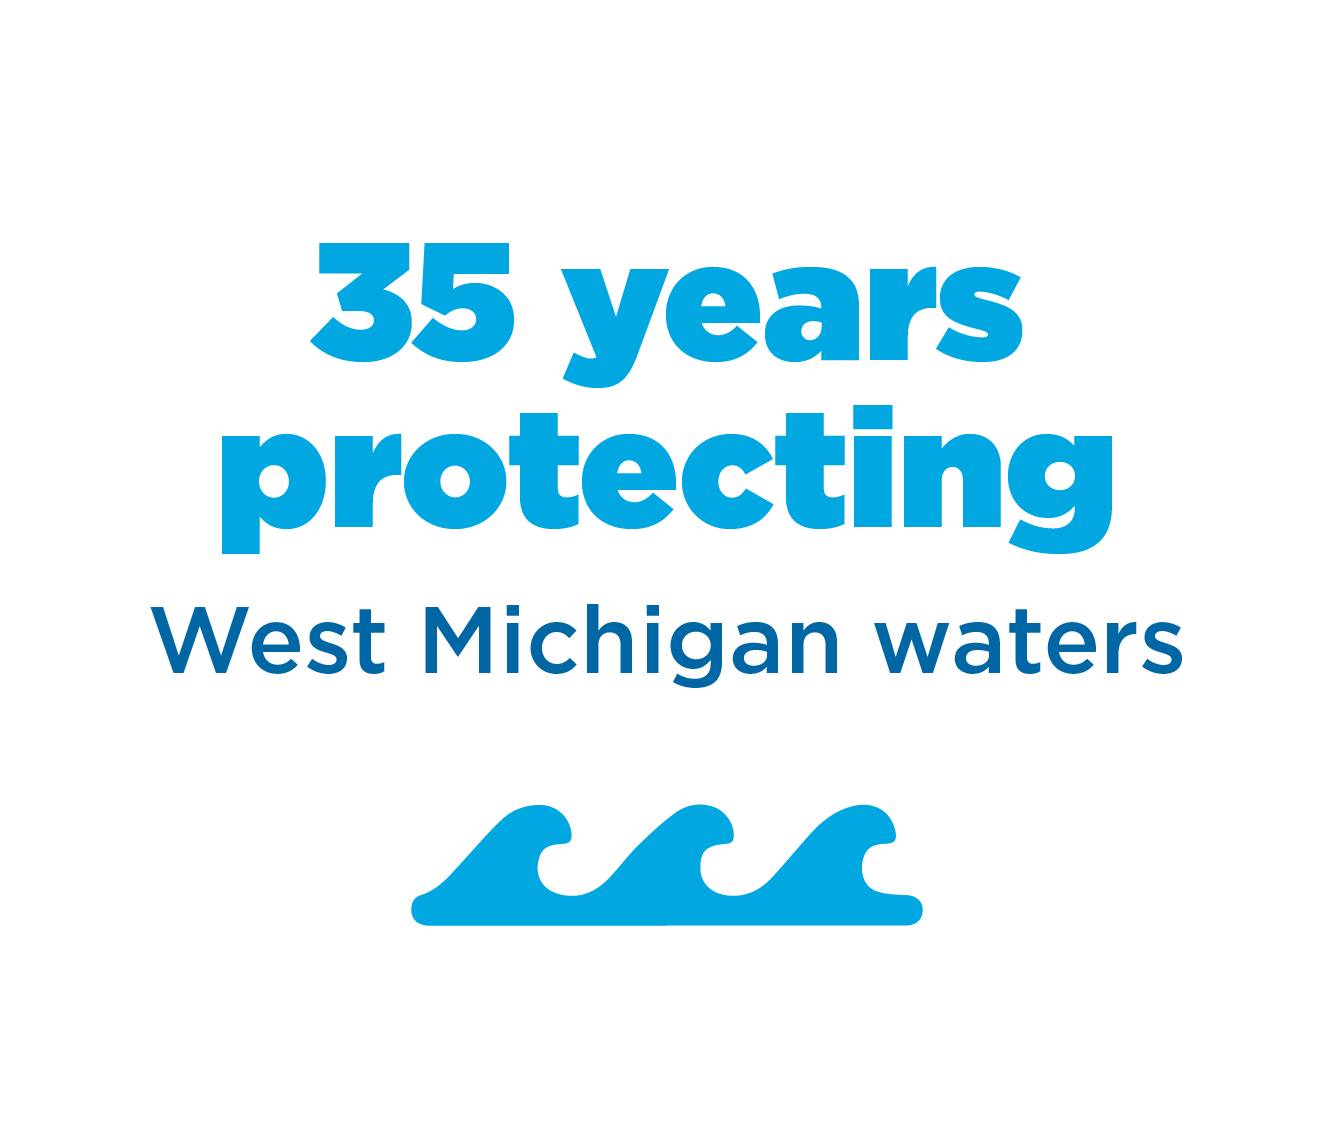 35 years of protecting West Michigan's waters